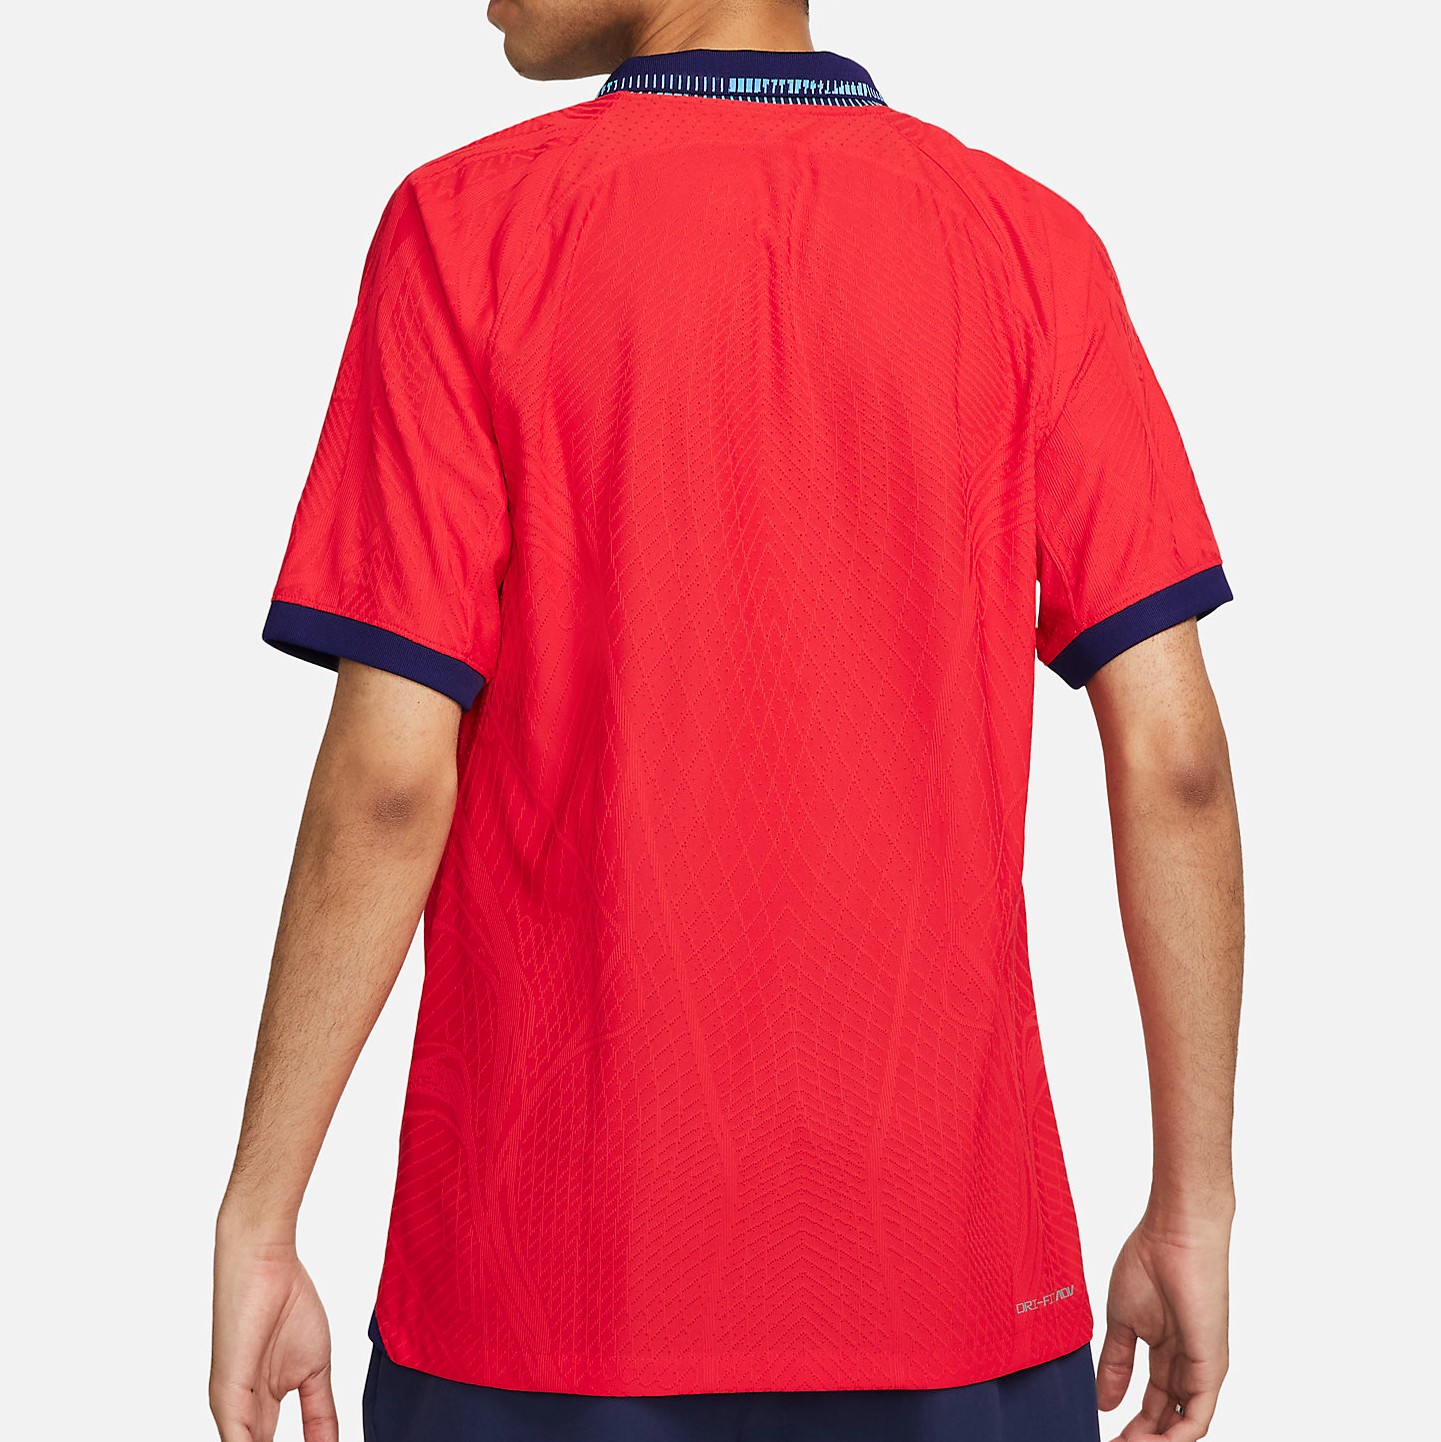 England World Cup 2022 Away Kit Back Look